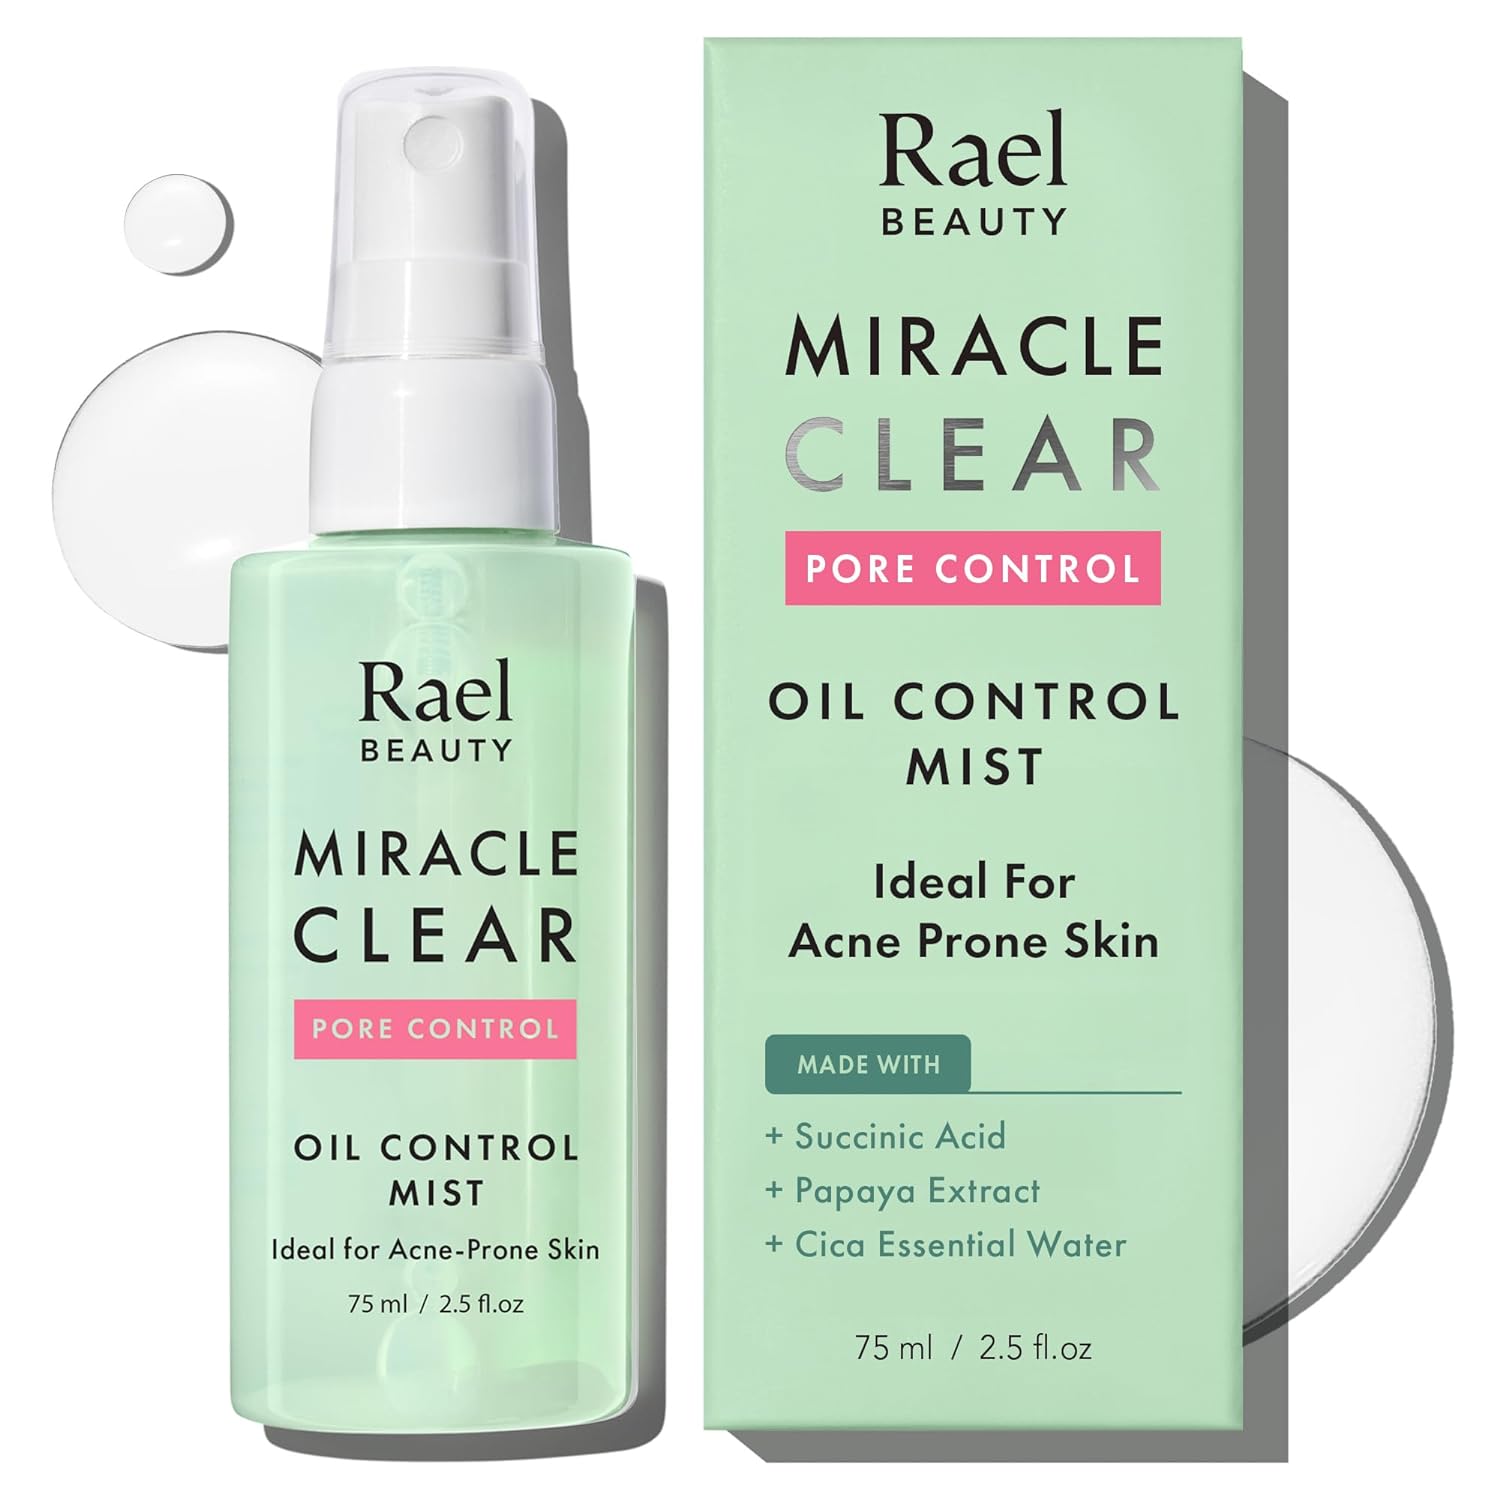 Rael Face Mist, Miracle Clear Oil Control Mist - Facial Spray Hydrating Mist, Pore Control for Acne Prone Skin, Korean Skincare, with Succinic Acid, Residue Free, Vegan, Cruelty Free (75ml, 2.5 fl oz)